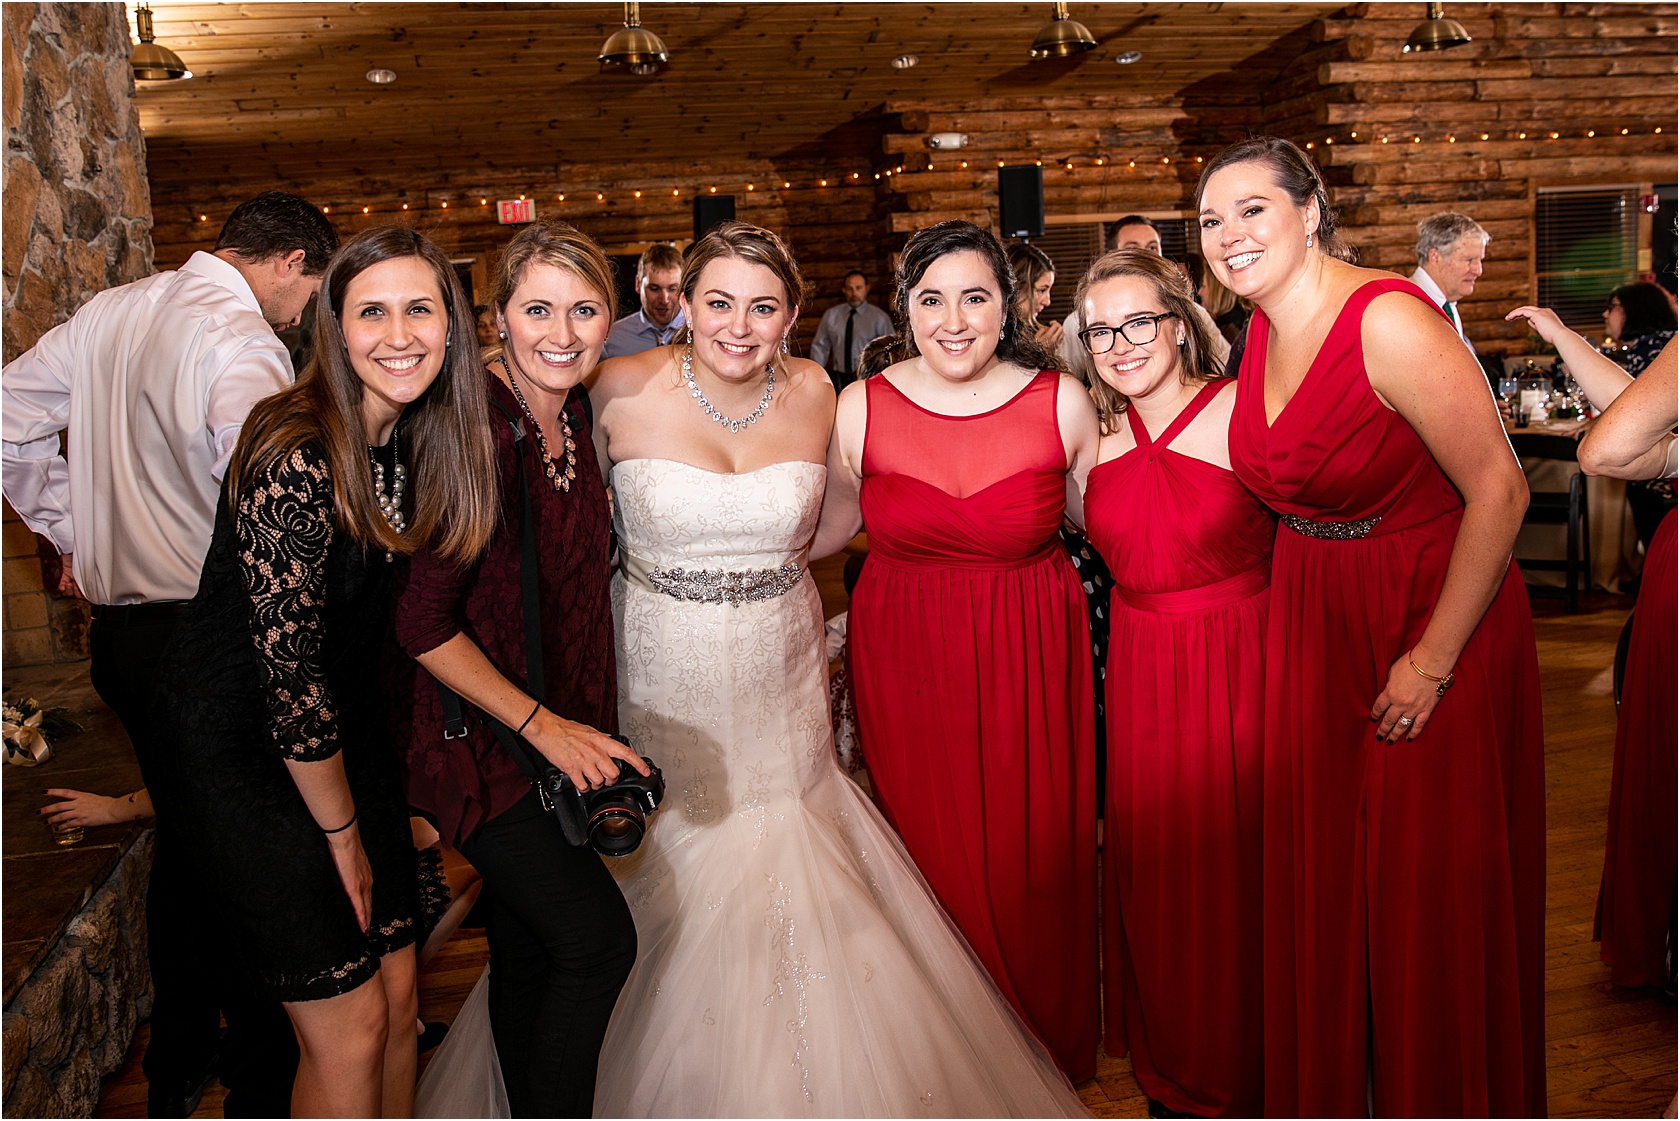  That time we shot a wedding and 5 of my brides were there… It was a dream come true. Love these babes. 